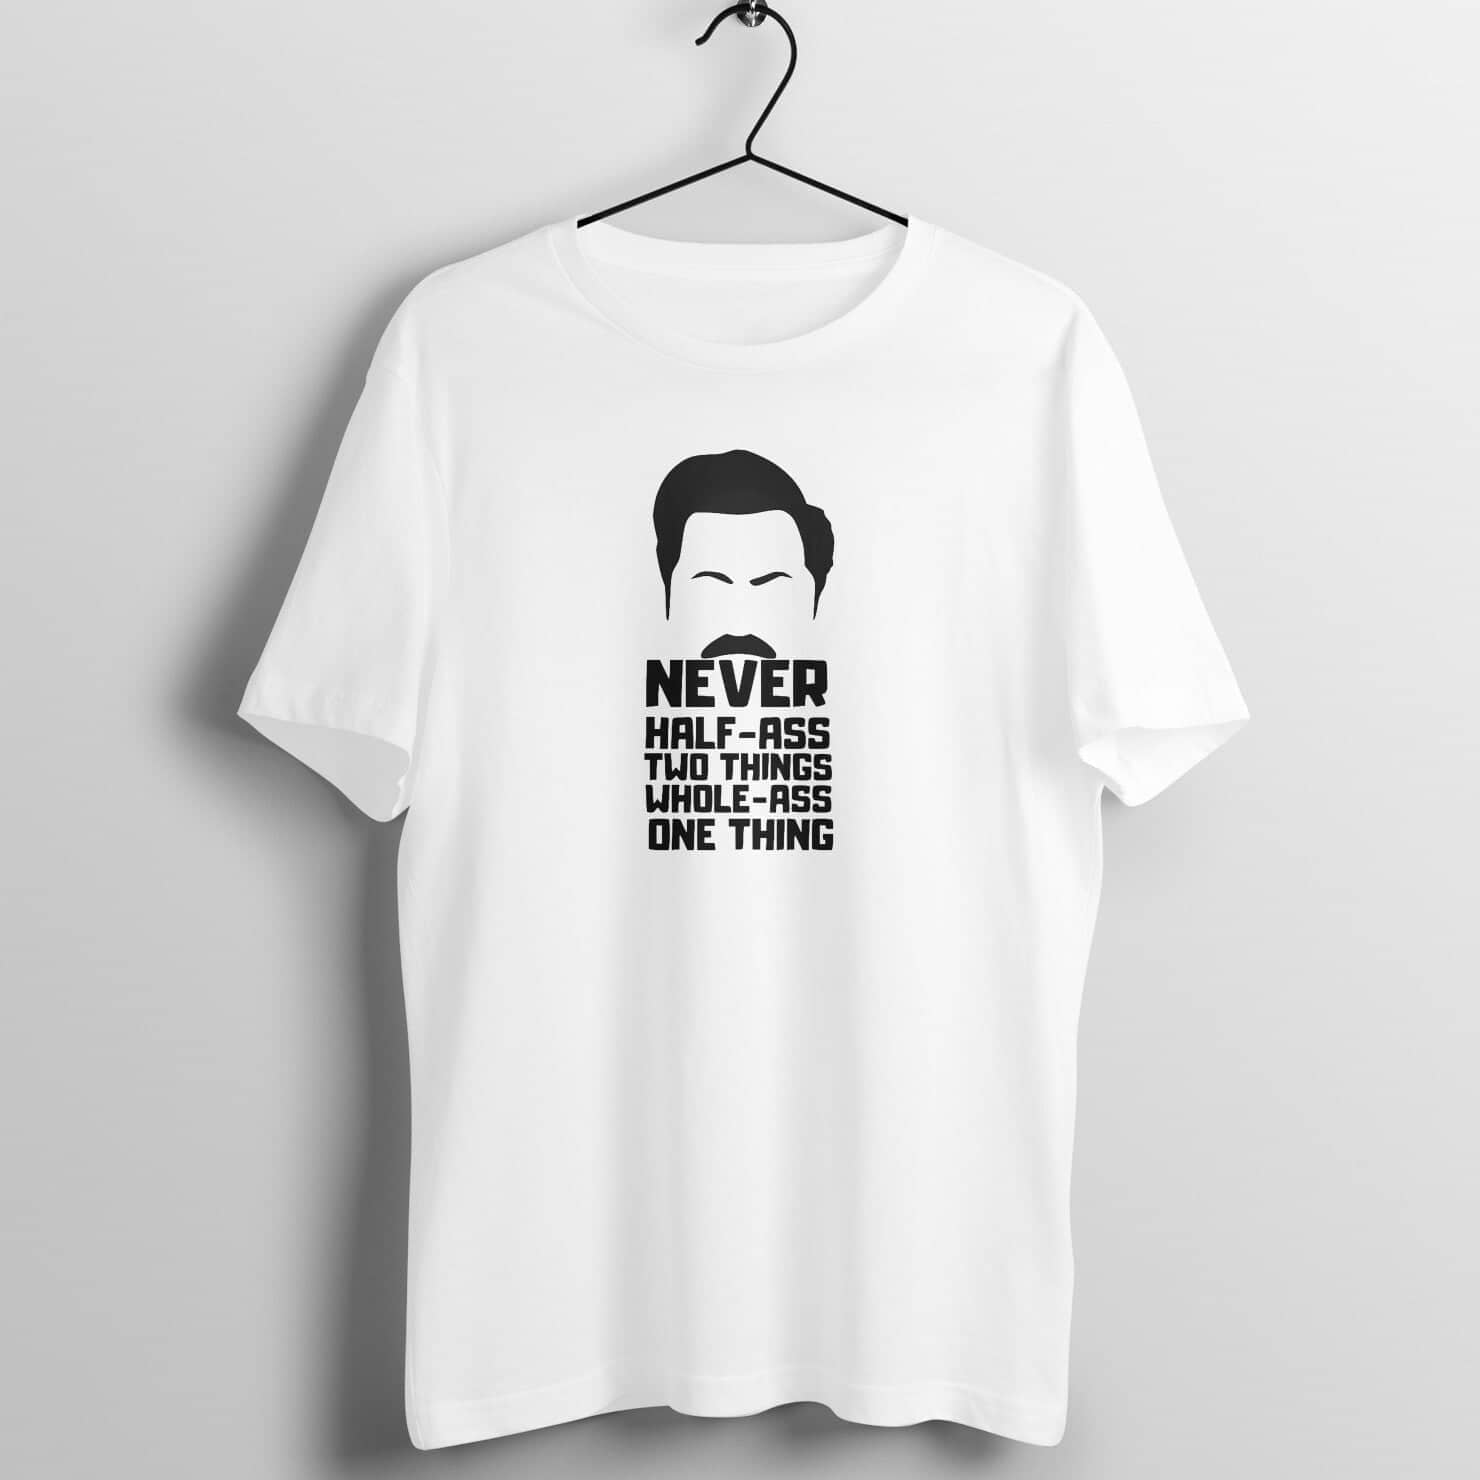 Never Half Ass Two Things Whole Ass One Thing Funny Ron Swanson White T Shirt for Men and Women freeshipping - Catch My Drift India